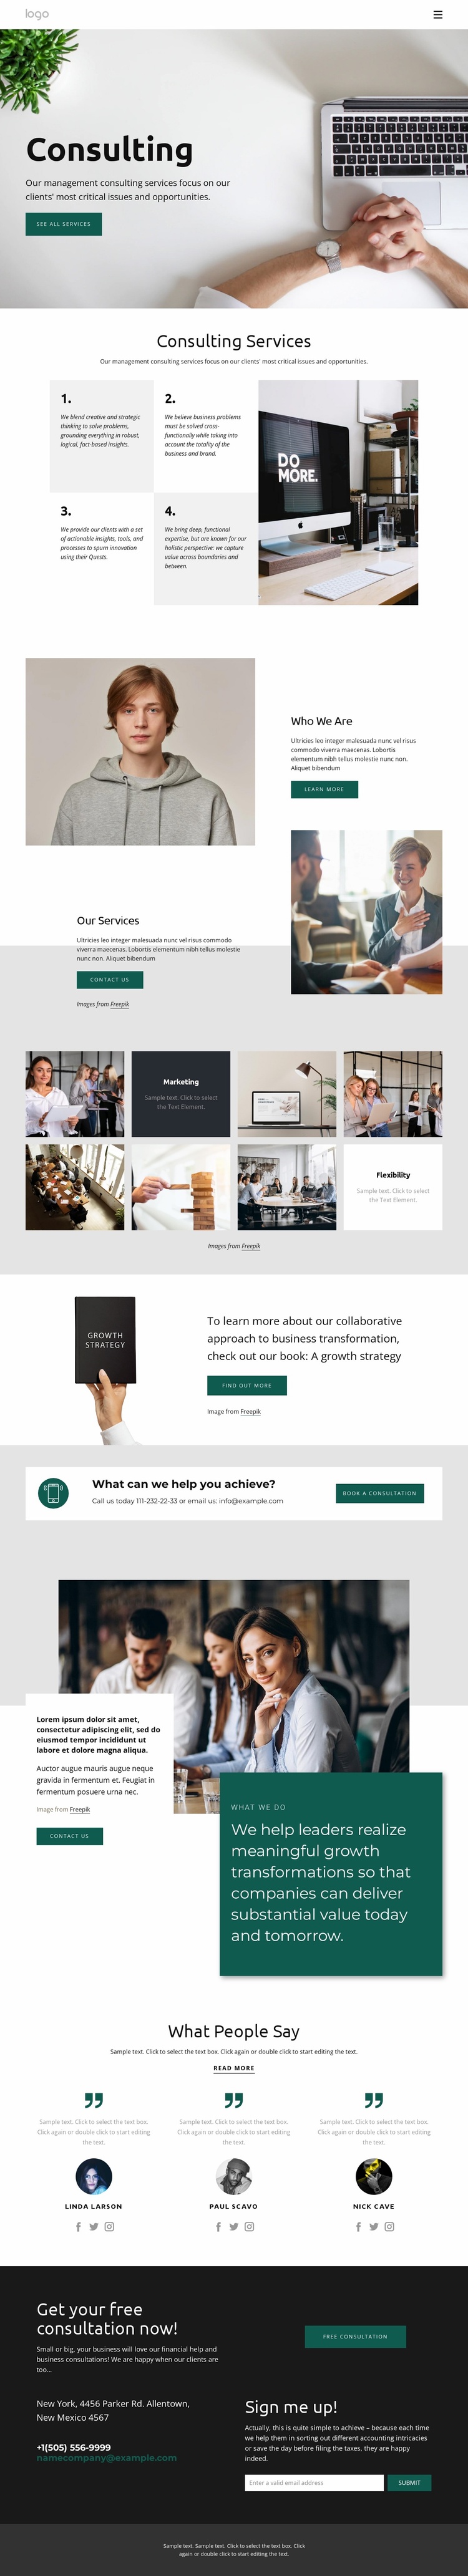 Business consultant company Landing Page